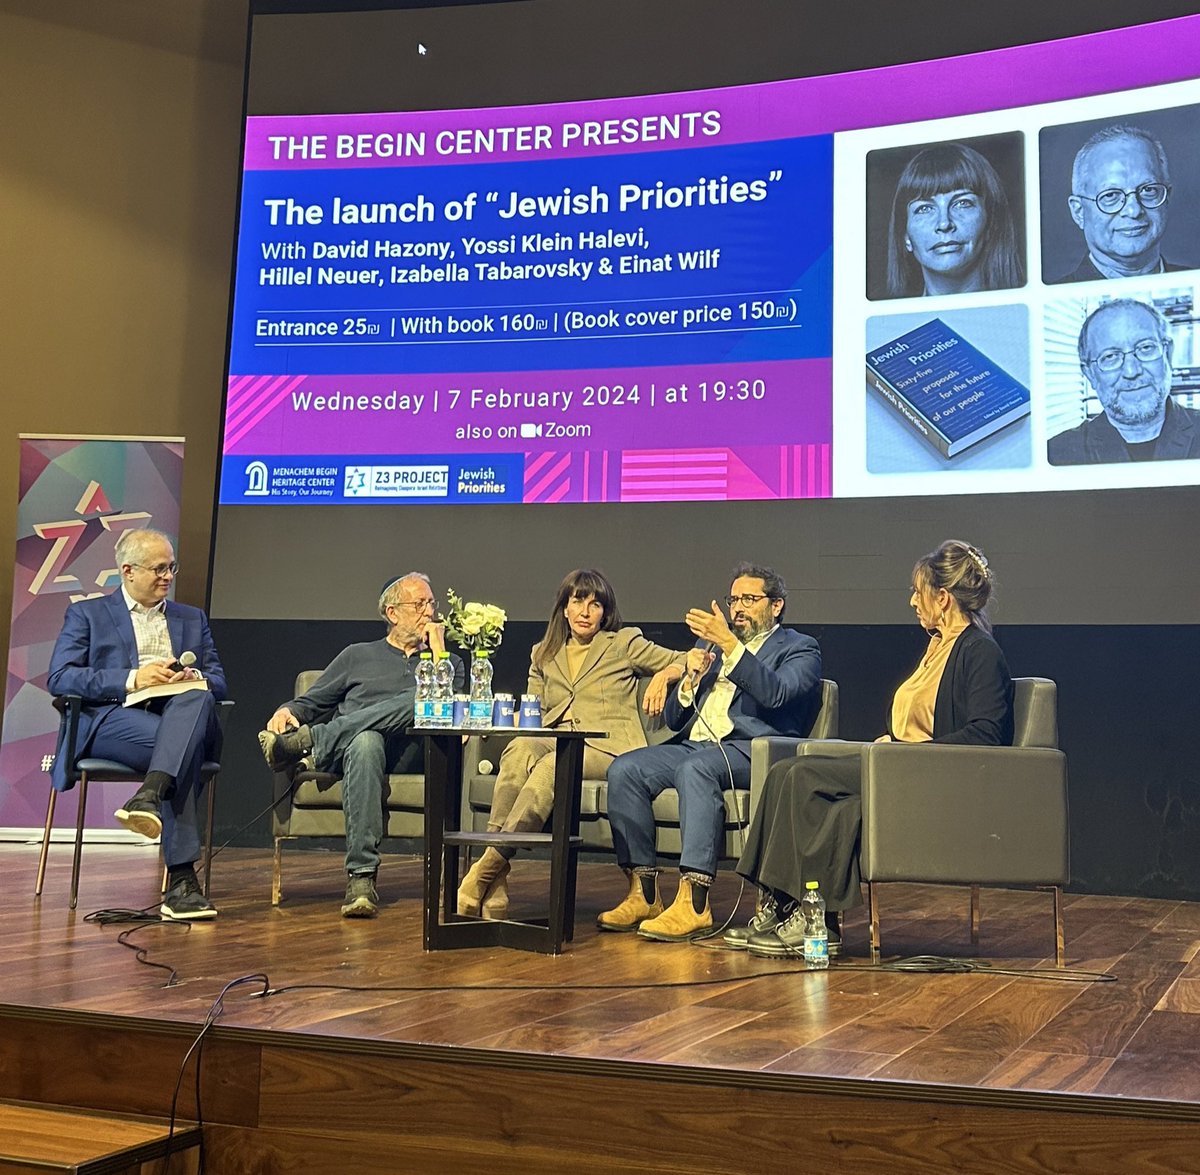 Really amazing event last night. Warm thanks to @YKleinHalevi @EinatWilf @HillelNeuer and @IzaTabaro for joining and making for so many powerful moments. Thanks also to @pauldgross of @BeginCenter as well as @z3_project and @PomeranzBooks for making it a perfect evening!